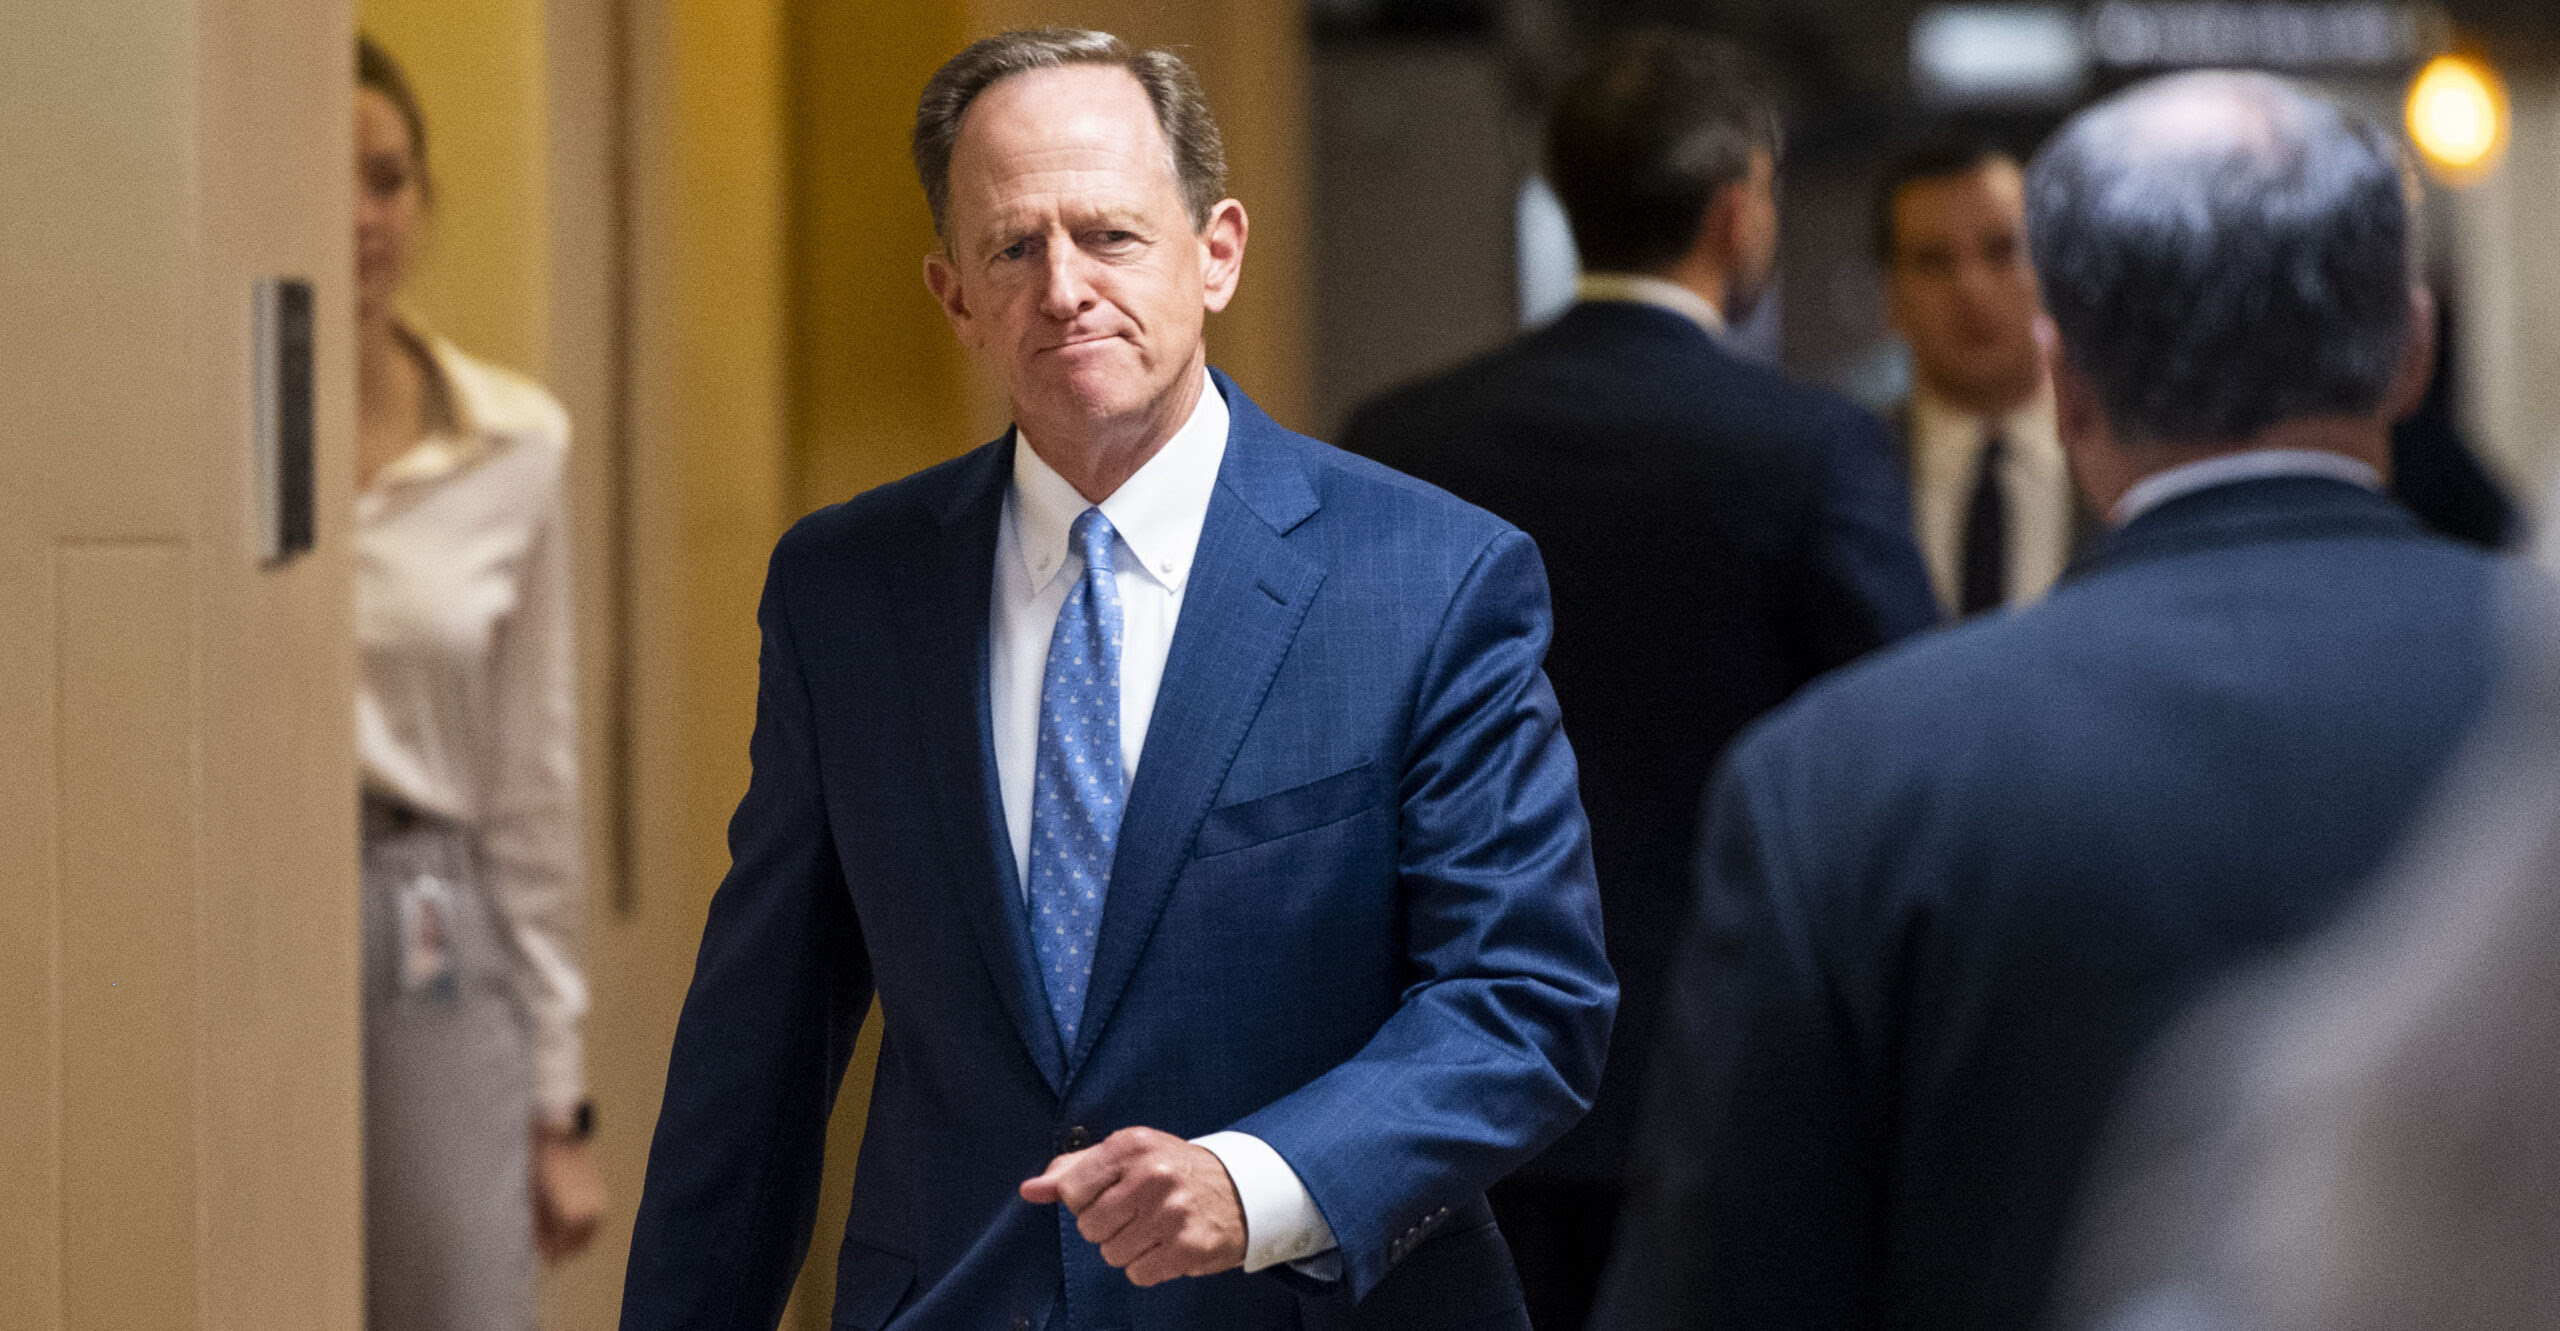 Sen. Toomey: Federal Reserve ‘Stonewalling’ Transparency Requests Over New Racism Focus